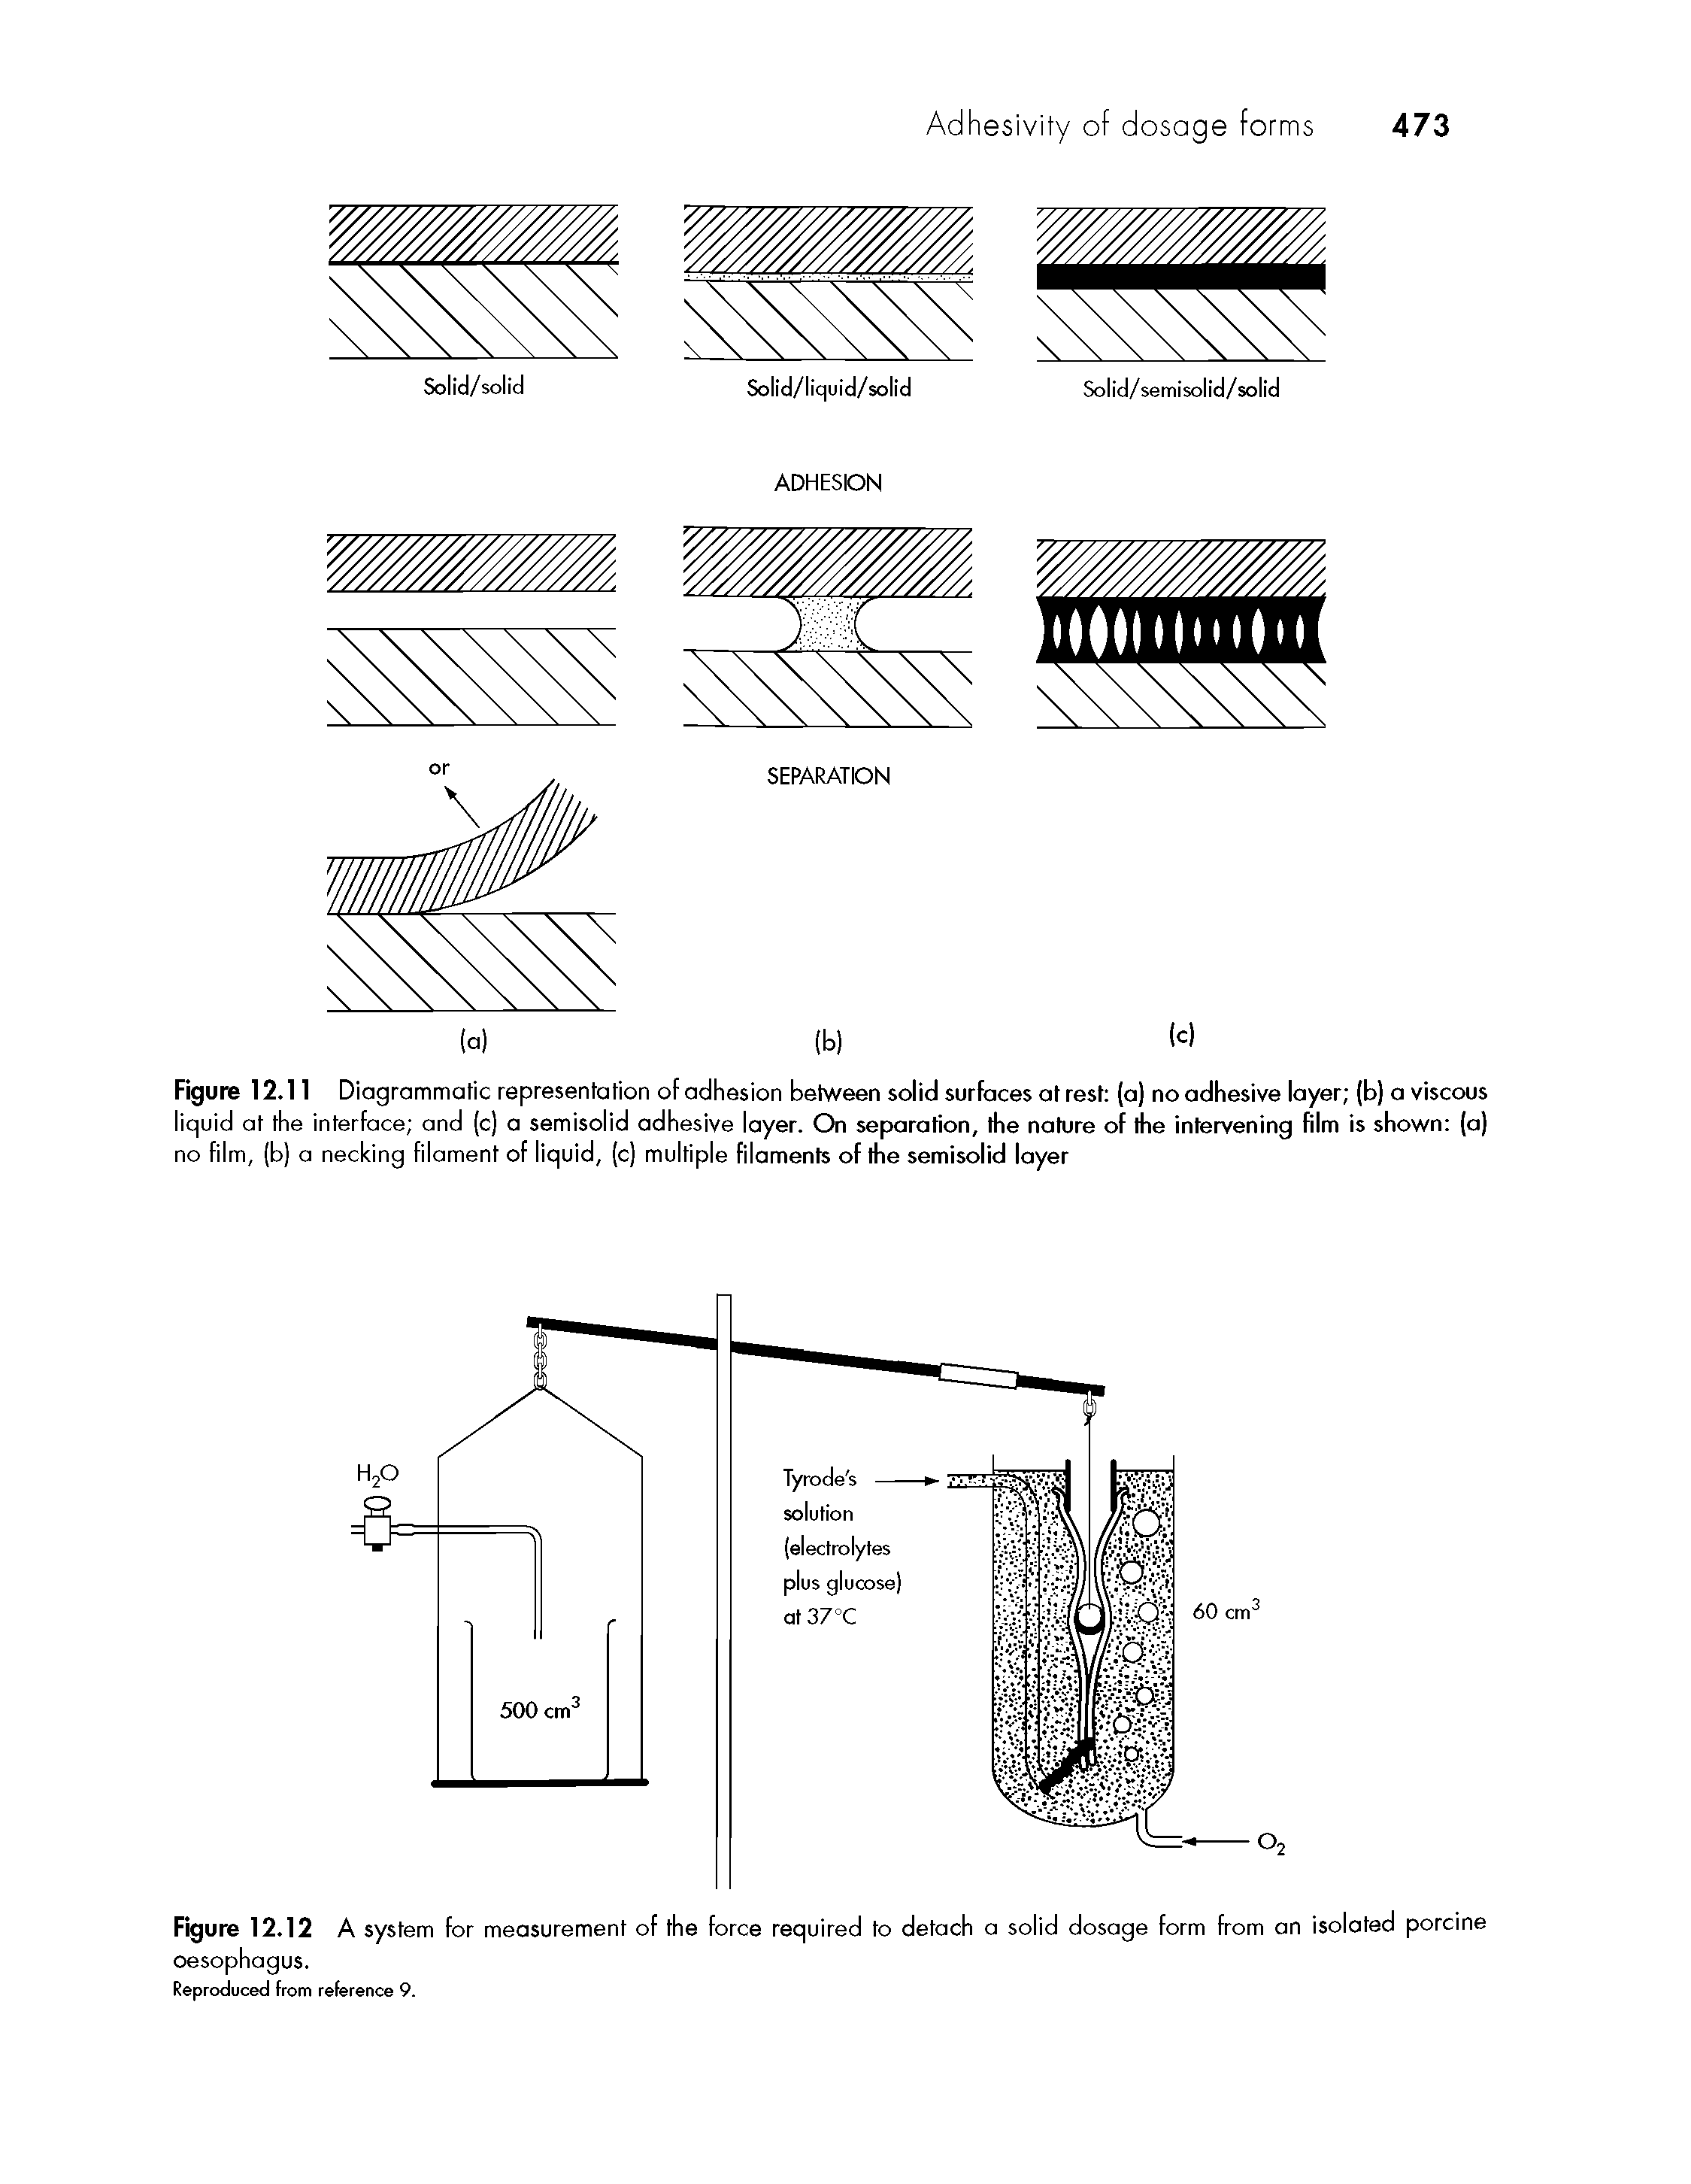 Figure 12.11 Diagrammatic representation of adhesion between solid surfaces at rest (a) no adhesive layer (b) a viscous liquid at the interface and (c) a semisolid adhesive layer. On separation, the nature of the intervening film is shown (a) no film, (b) a necking filament of liquid, (c) multiple filaments of the semisolid layer...